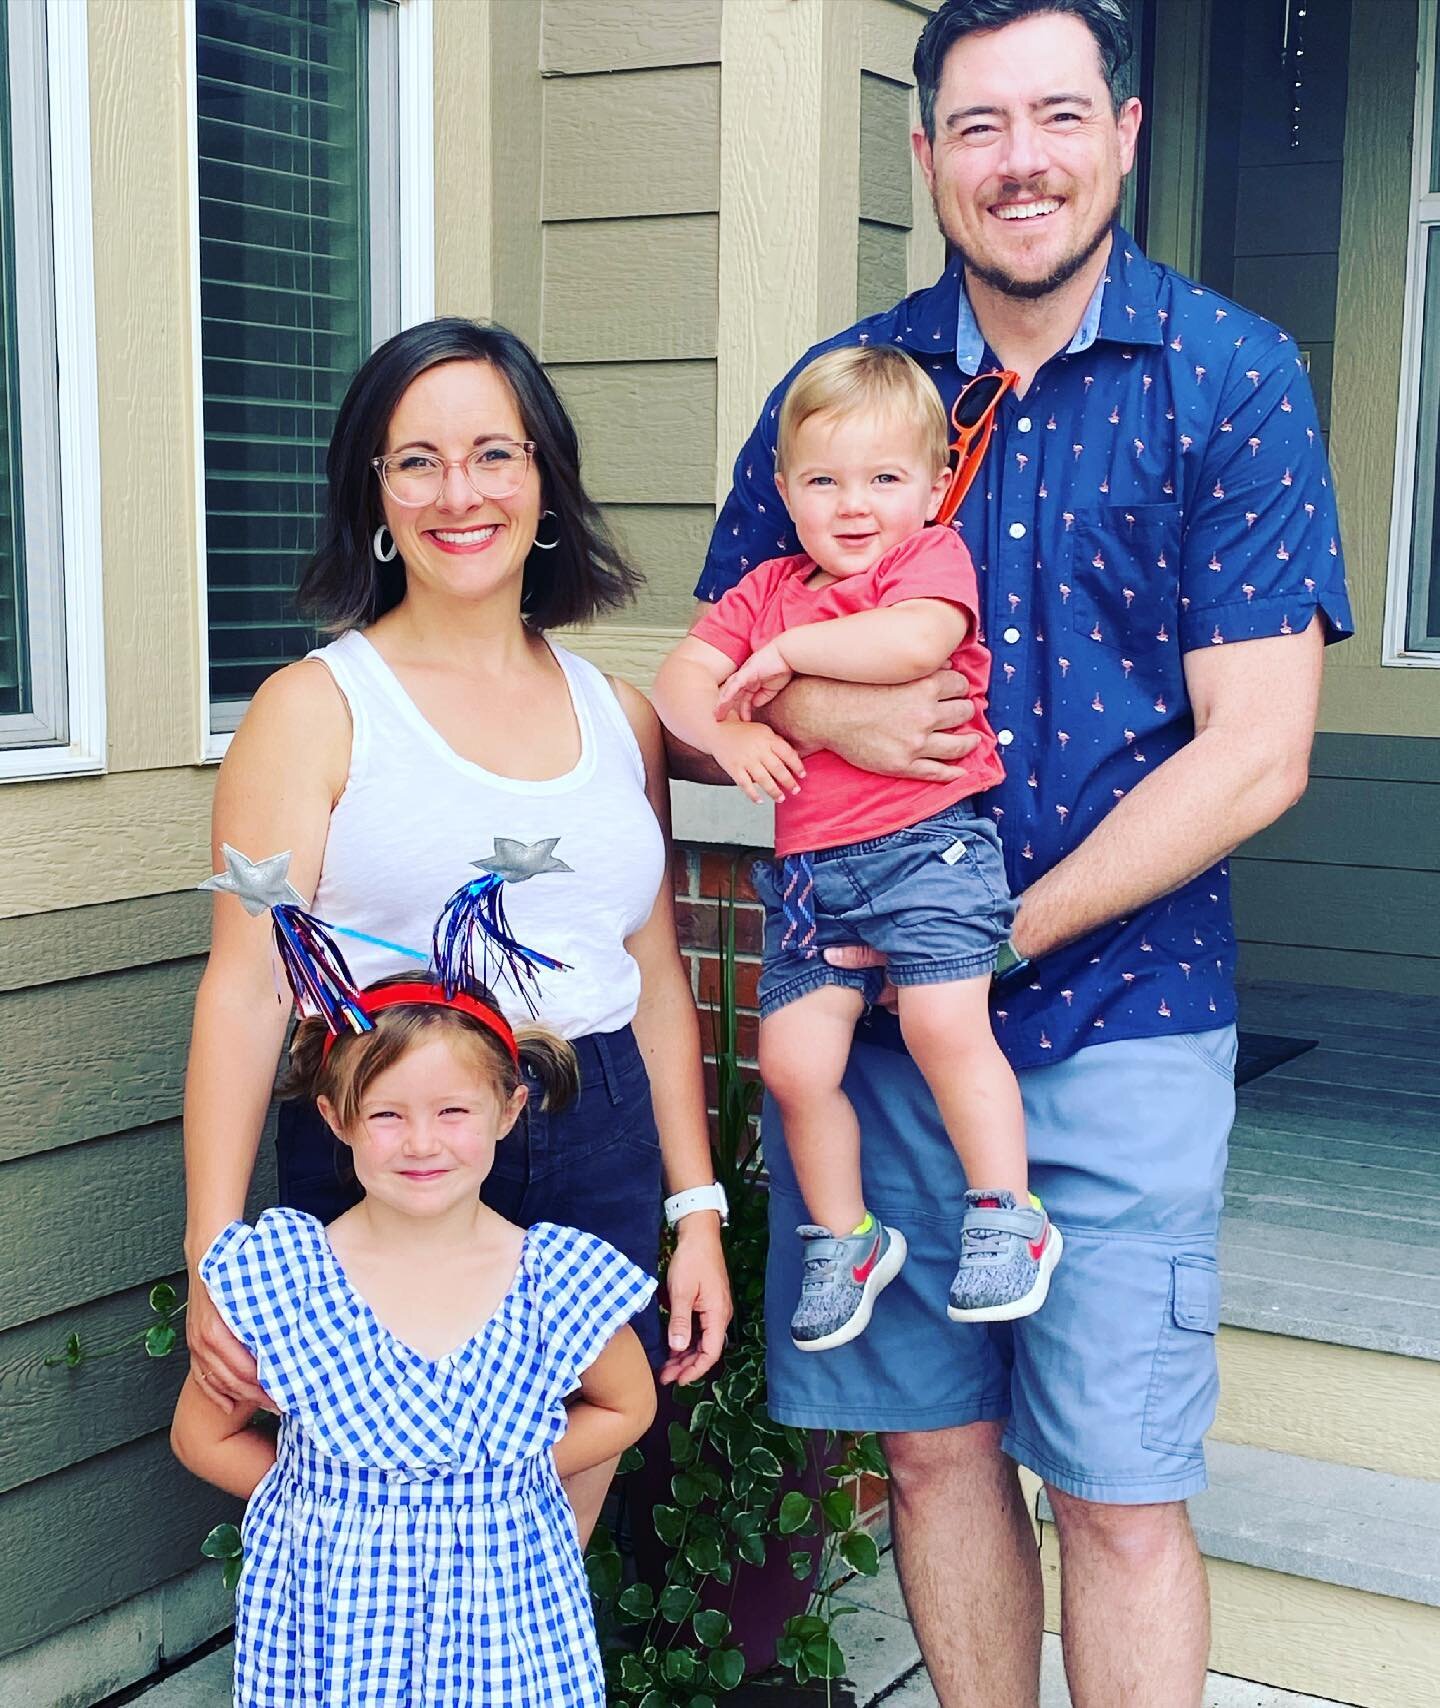 We had a wonderful Fourth of July! 🇺🇸 grateful for friends, freedom and food!